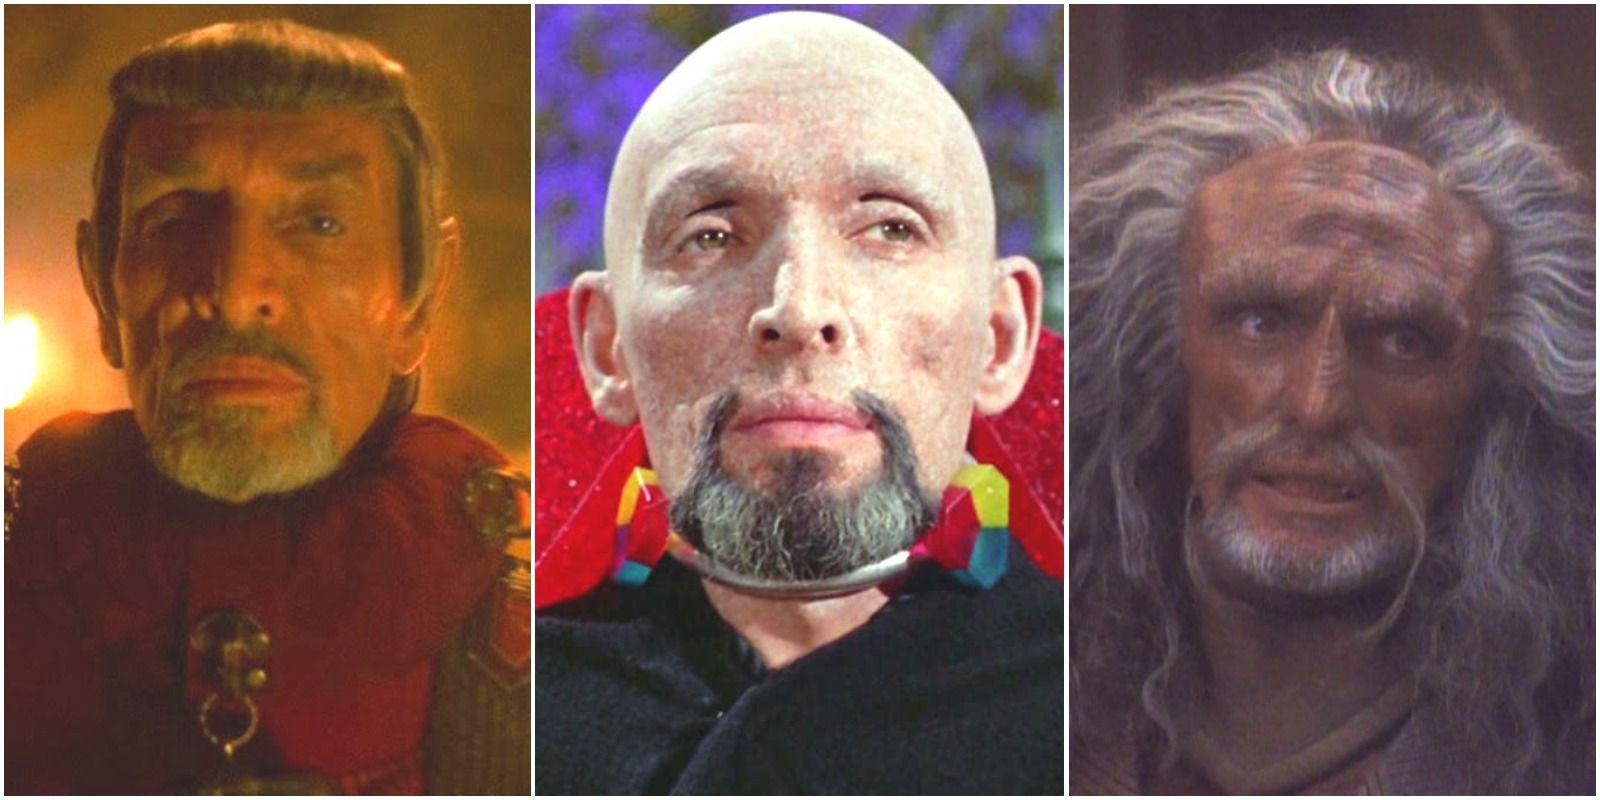 Vulcan Priest, Galt, and Klingon from TOS, DS9, and Voyager